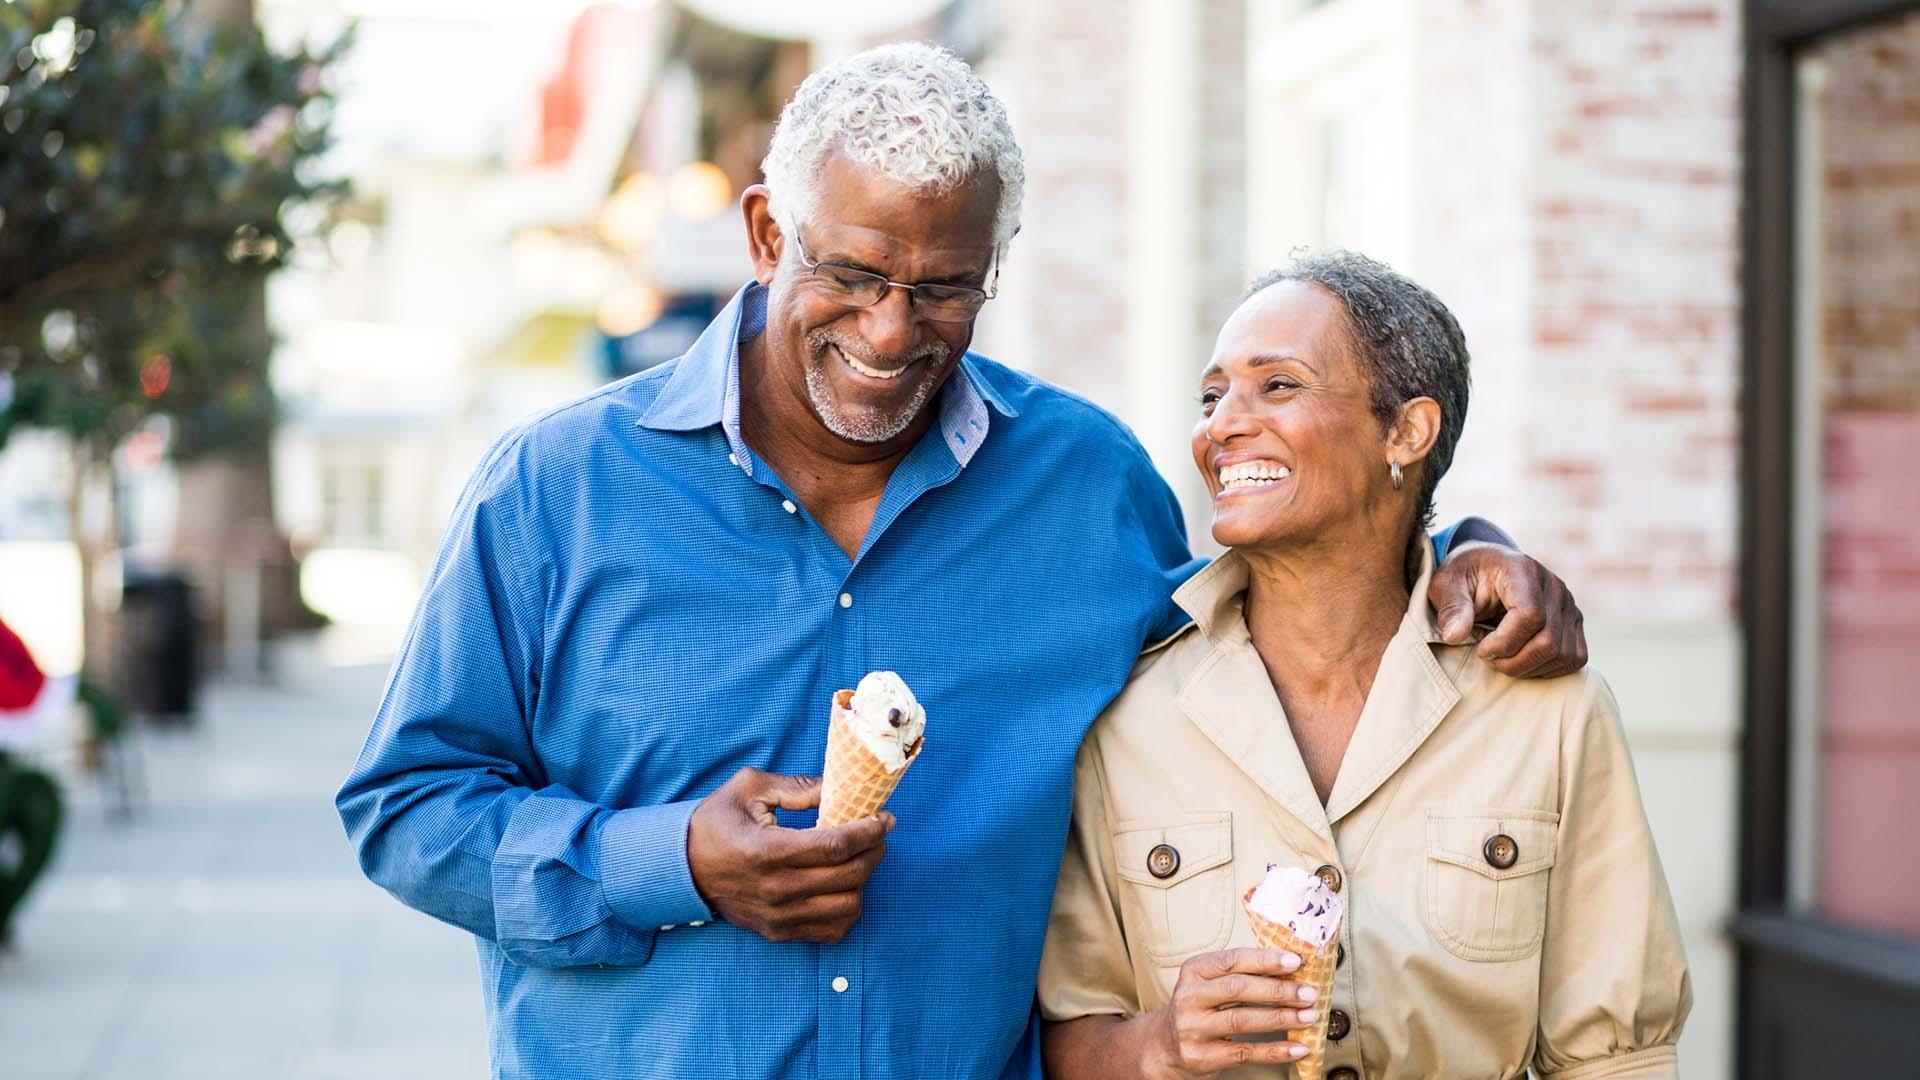 smiling couple while eating ice cream 